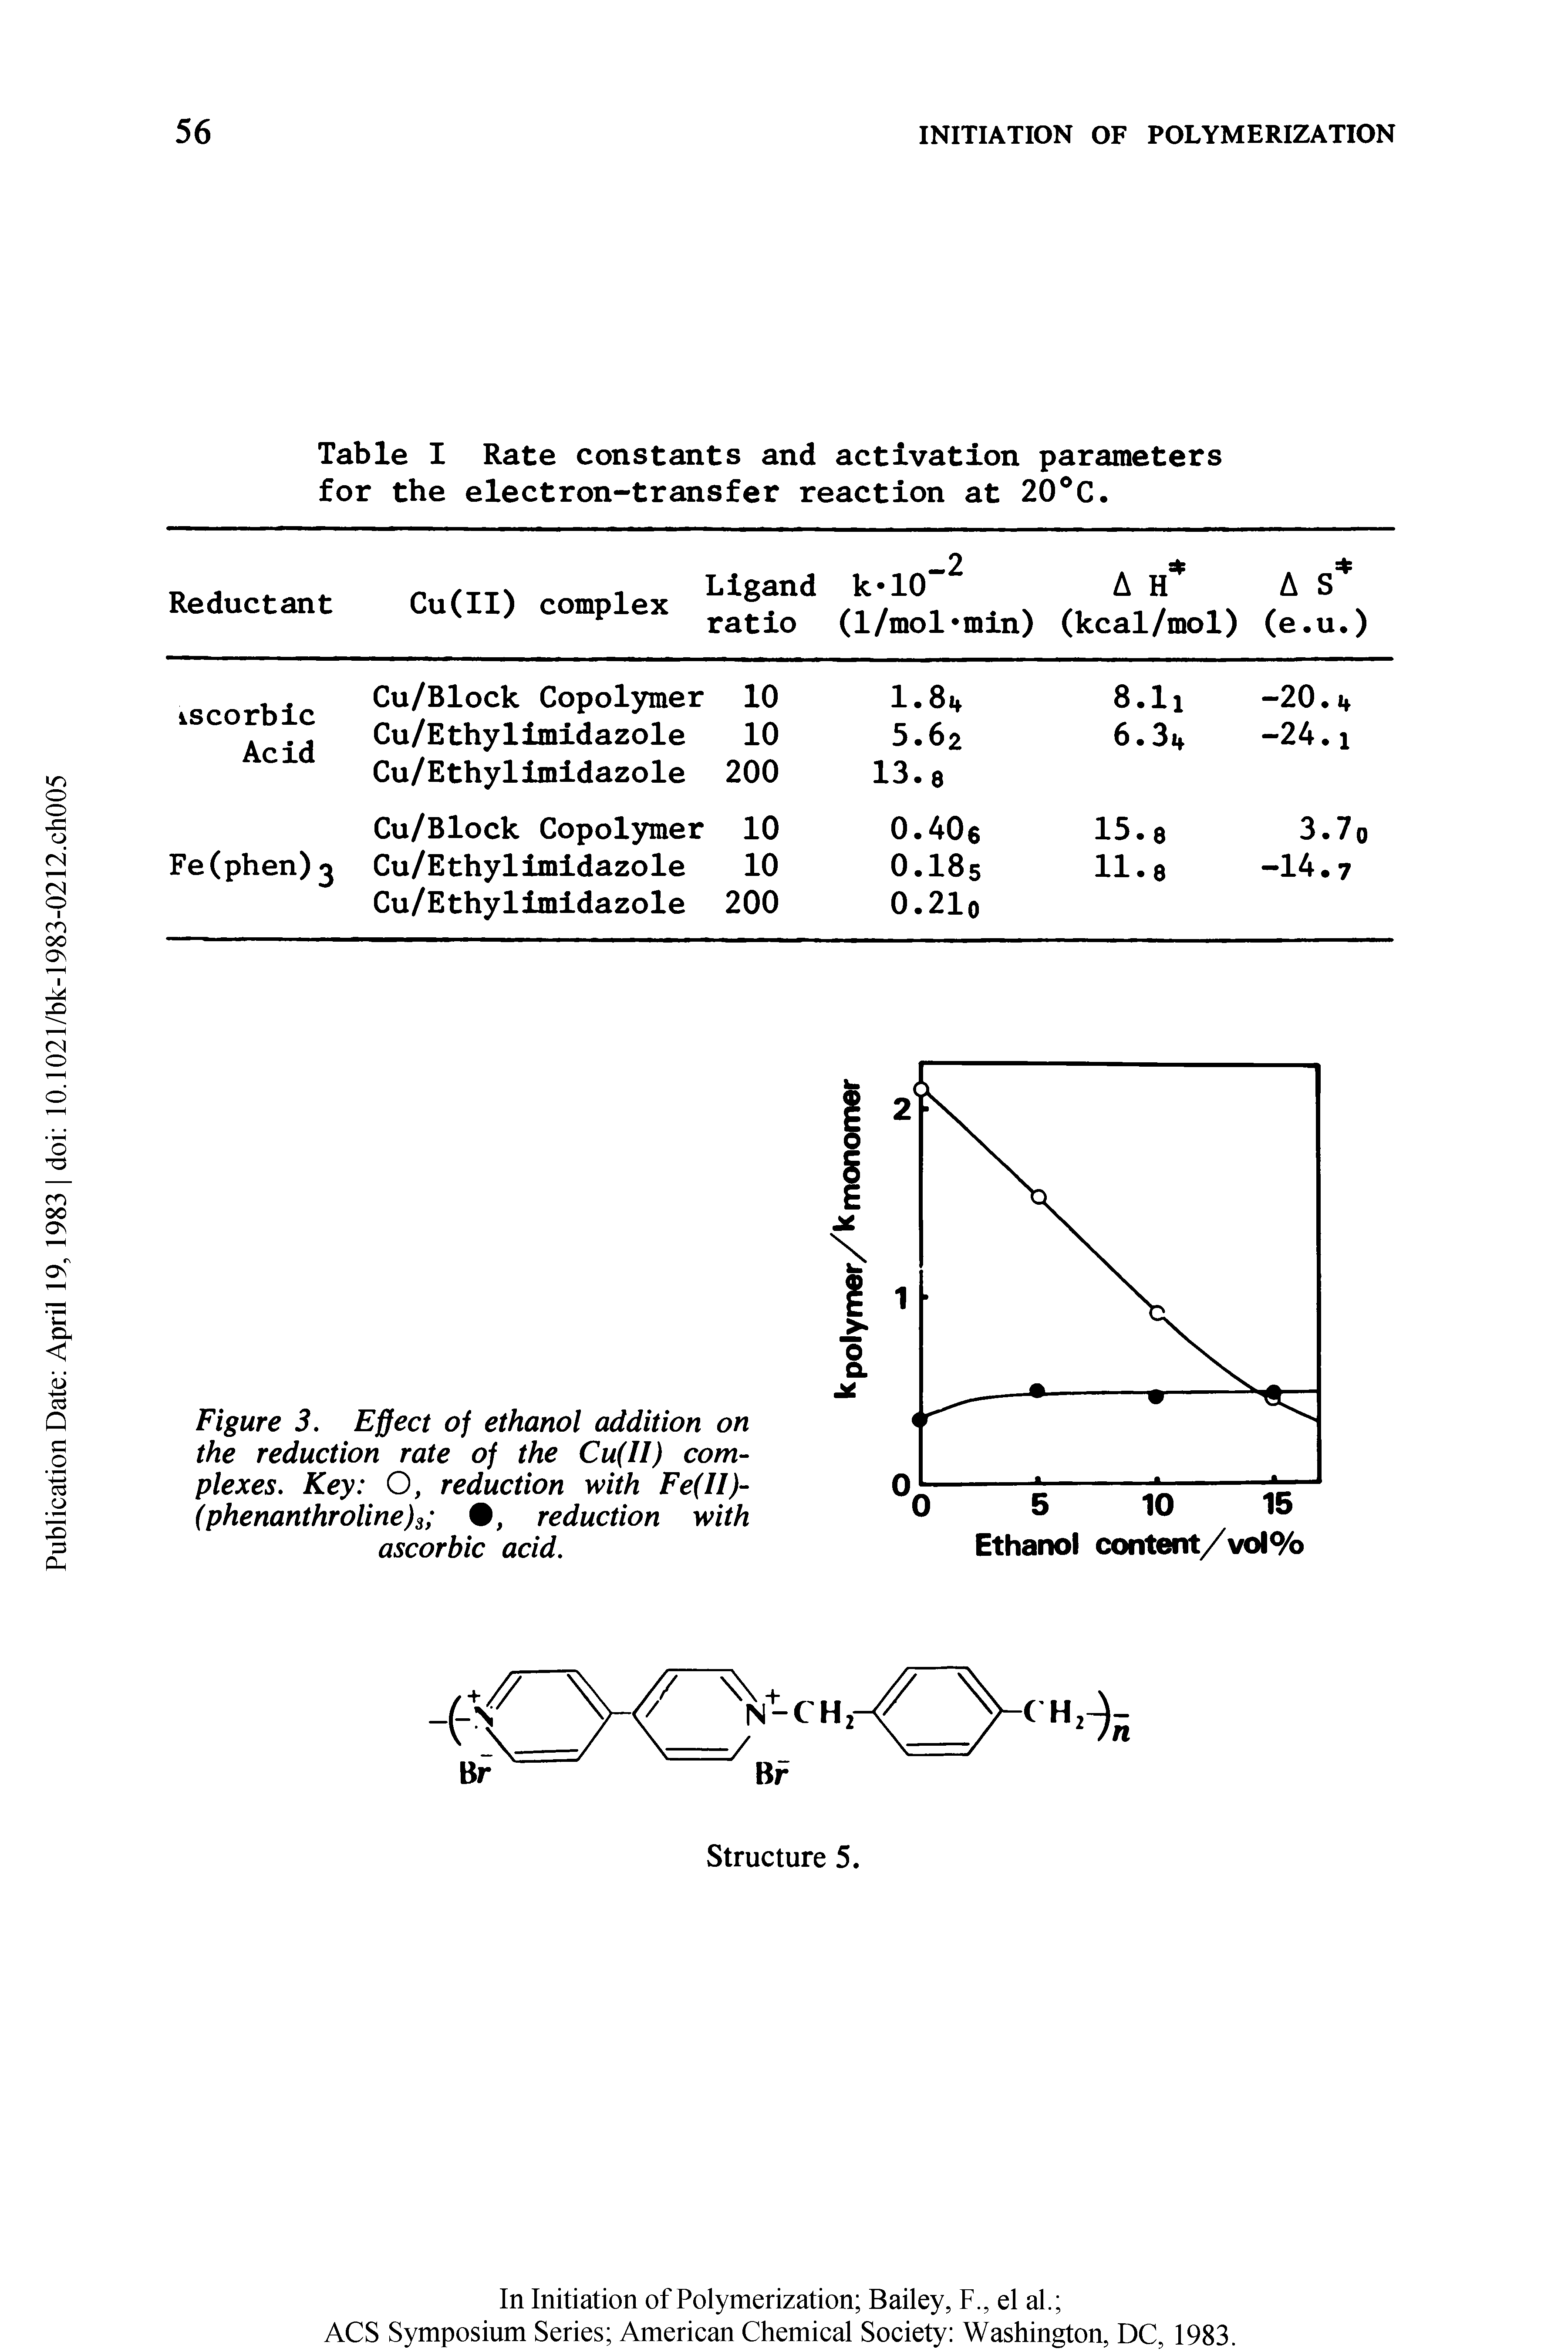 Figure 3. Effect of ethanol addition on the reduction rate of the Cu(II) complexes. Key O, reduction with Fe(II)-(phenanthroline)s , reduction with ascorbic acid.